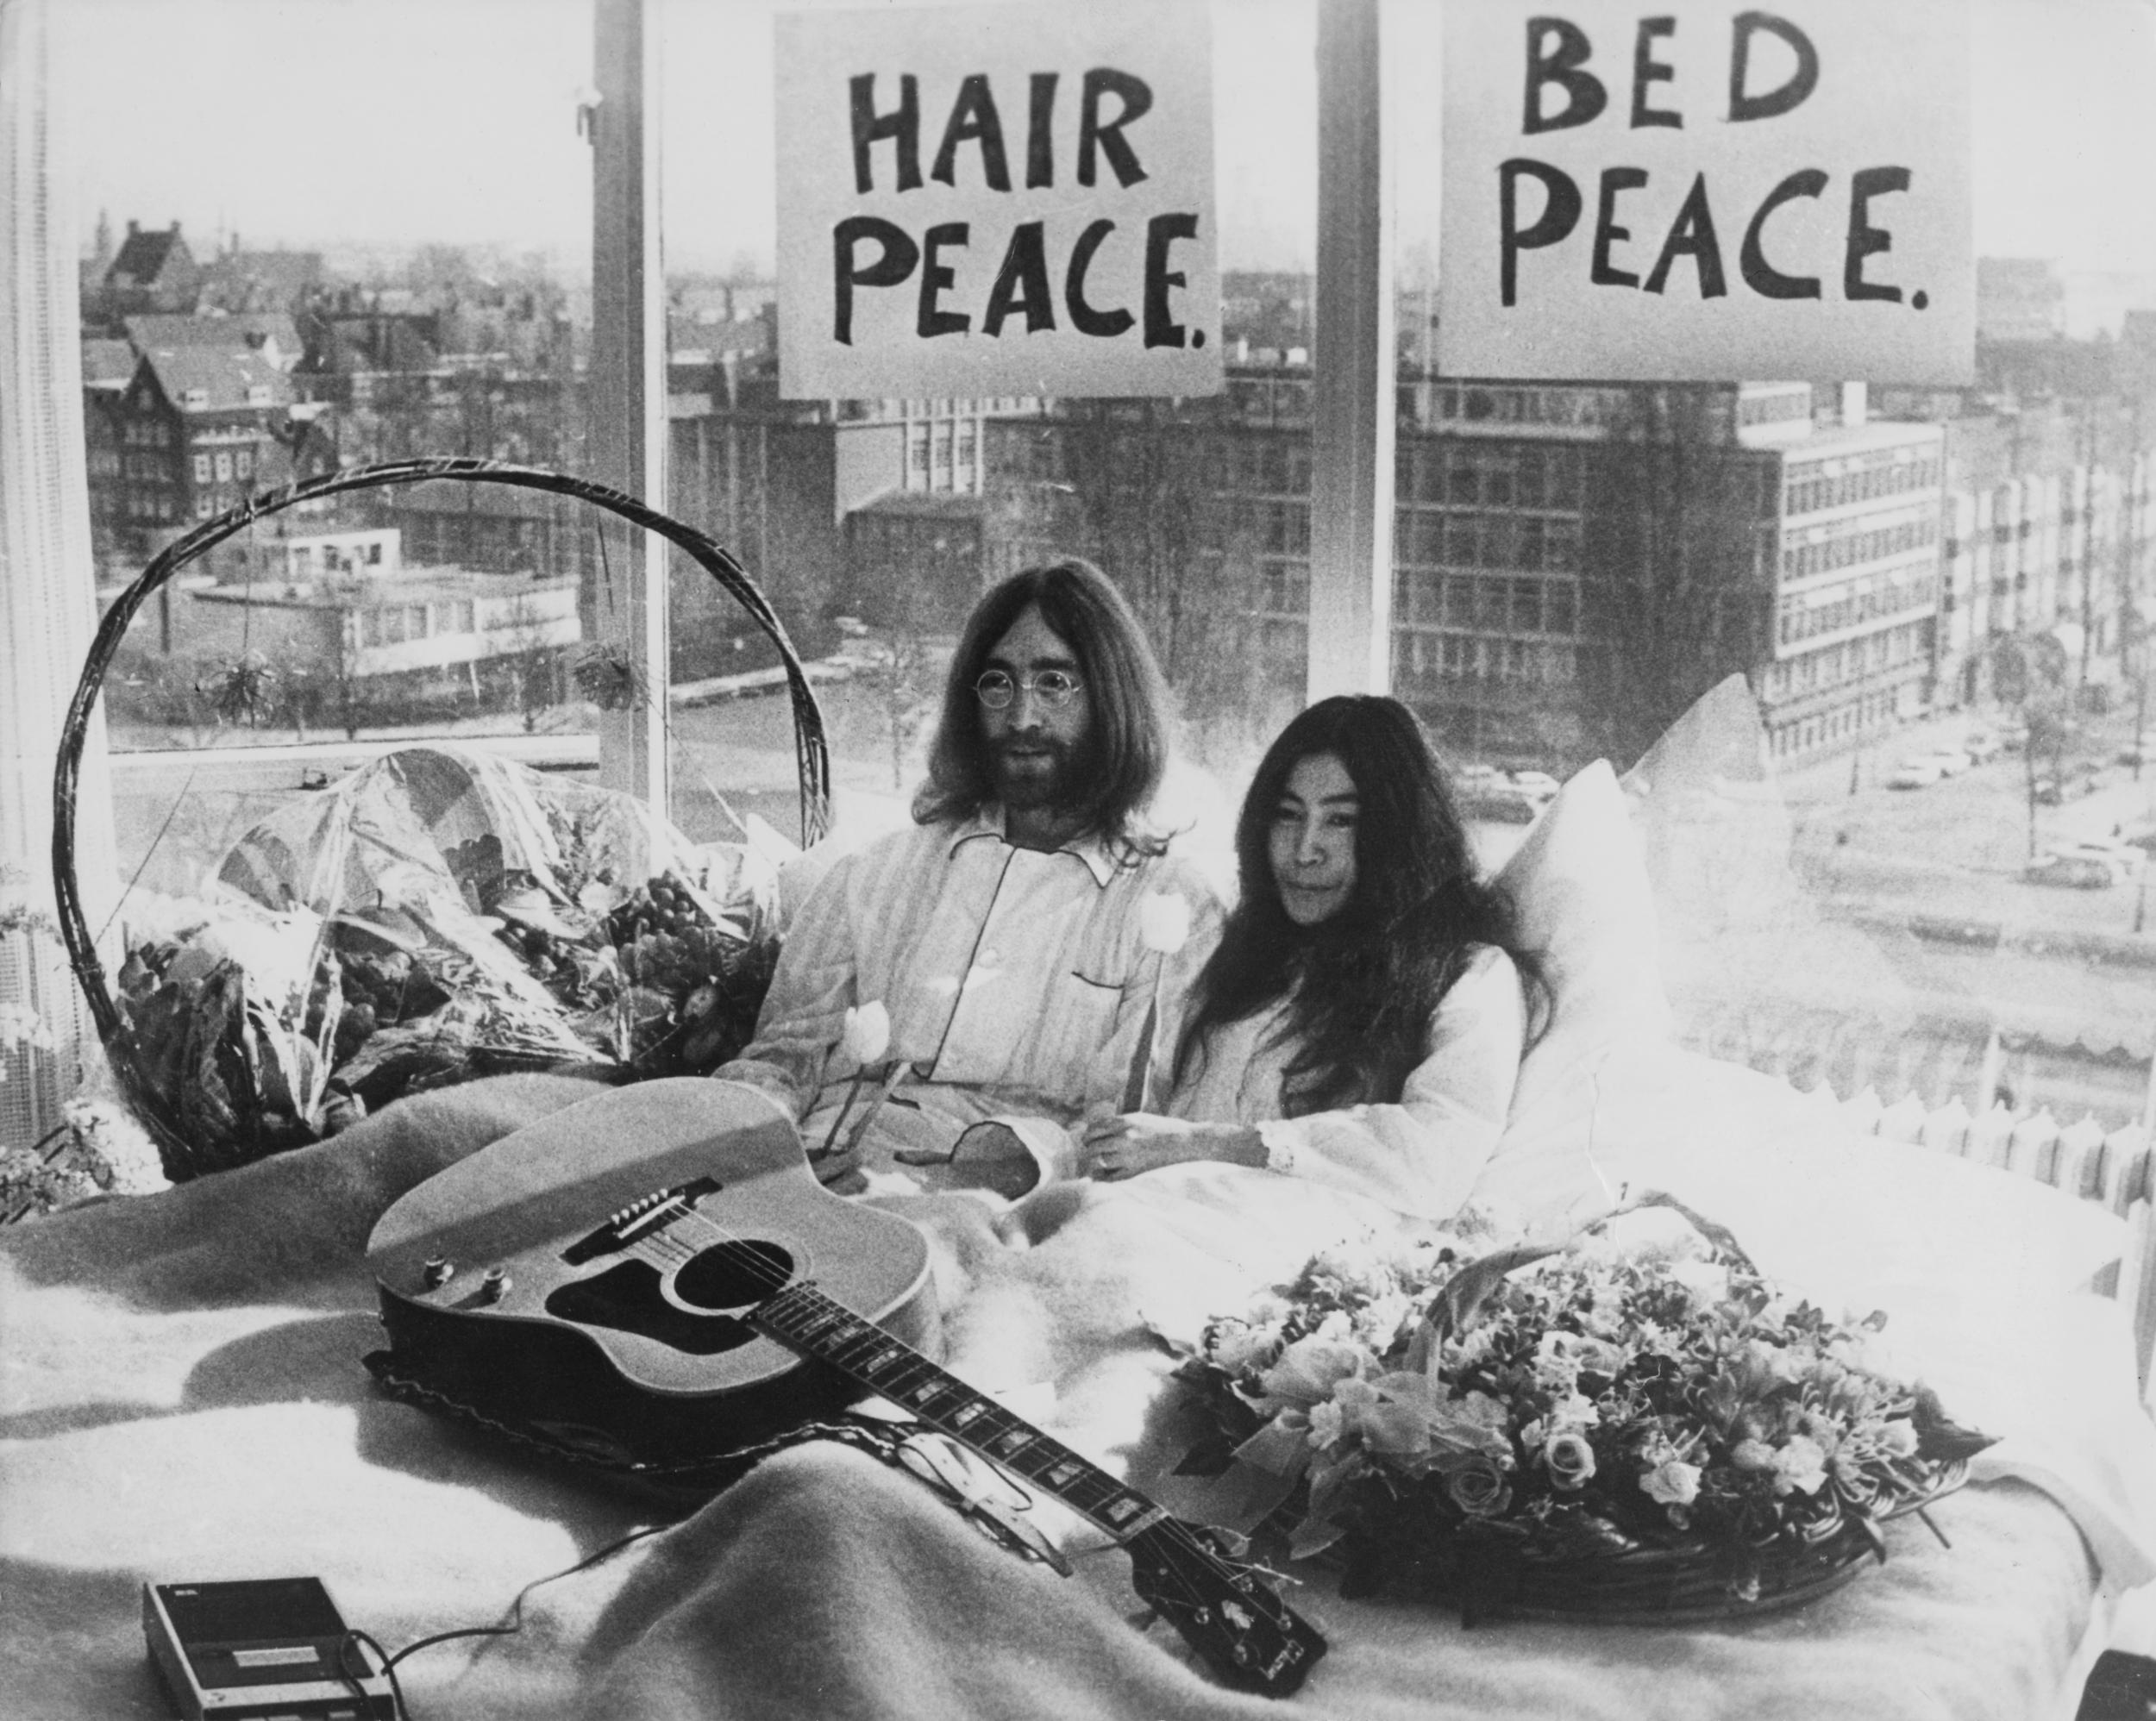 john lennon was nude with wife